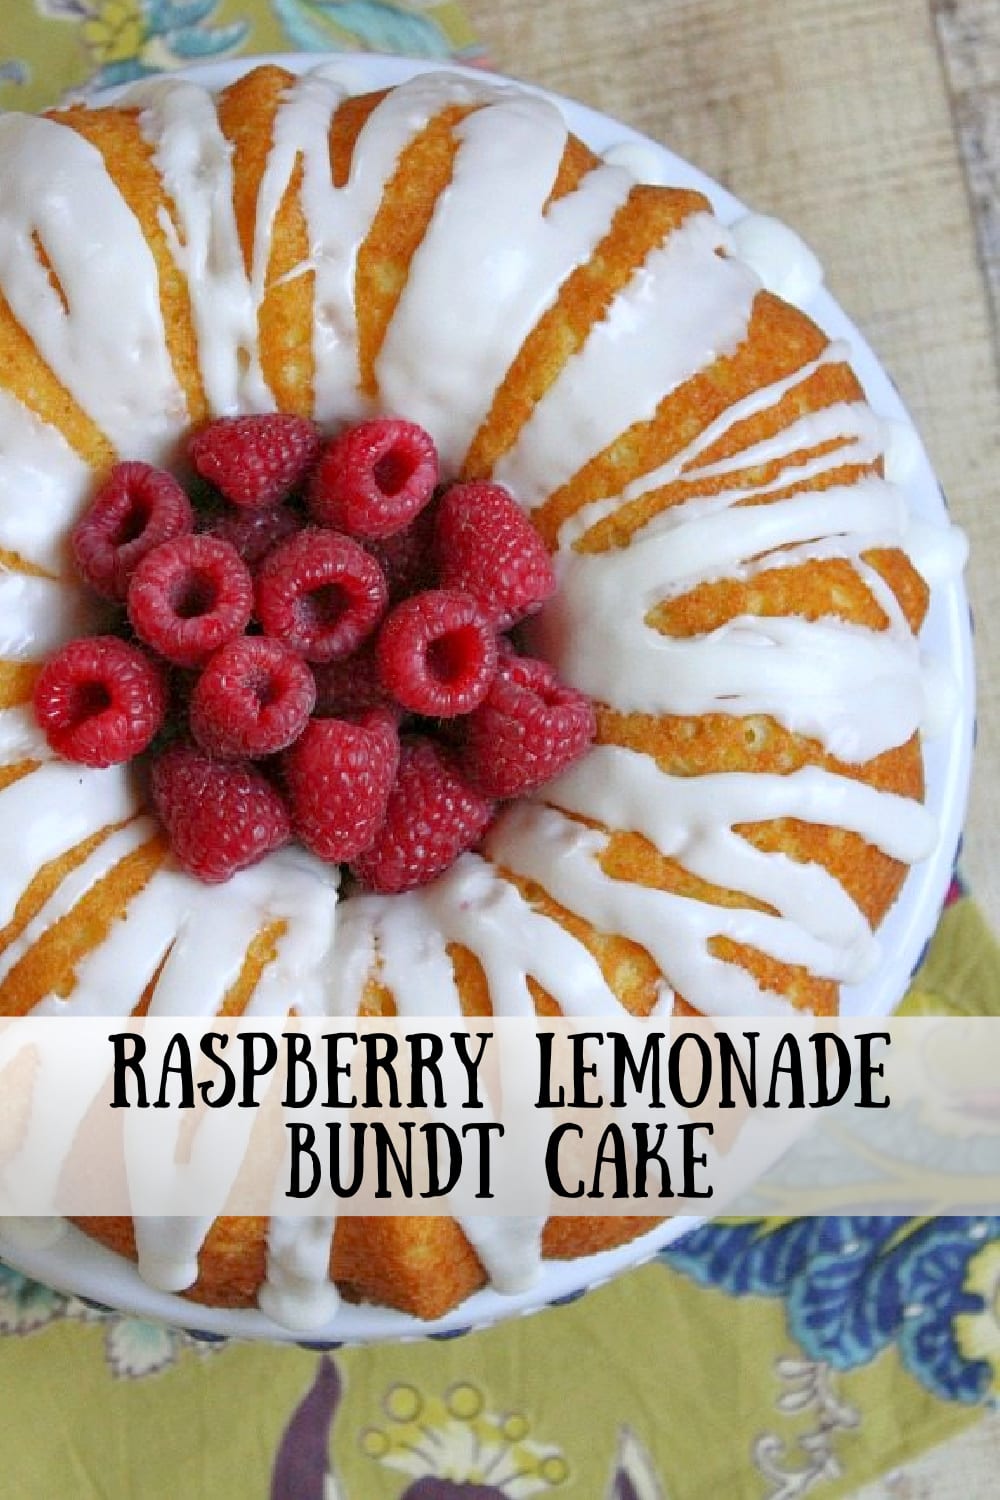 Lemon Blueberry Bundt Cake (with Cream Cheese Icing!) - Cooking Classy